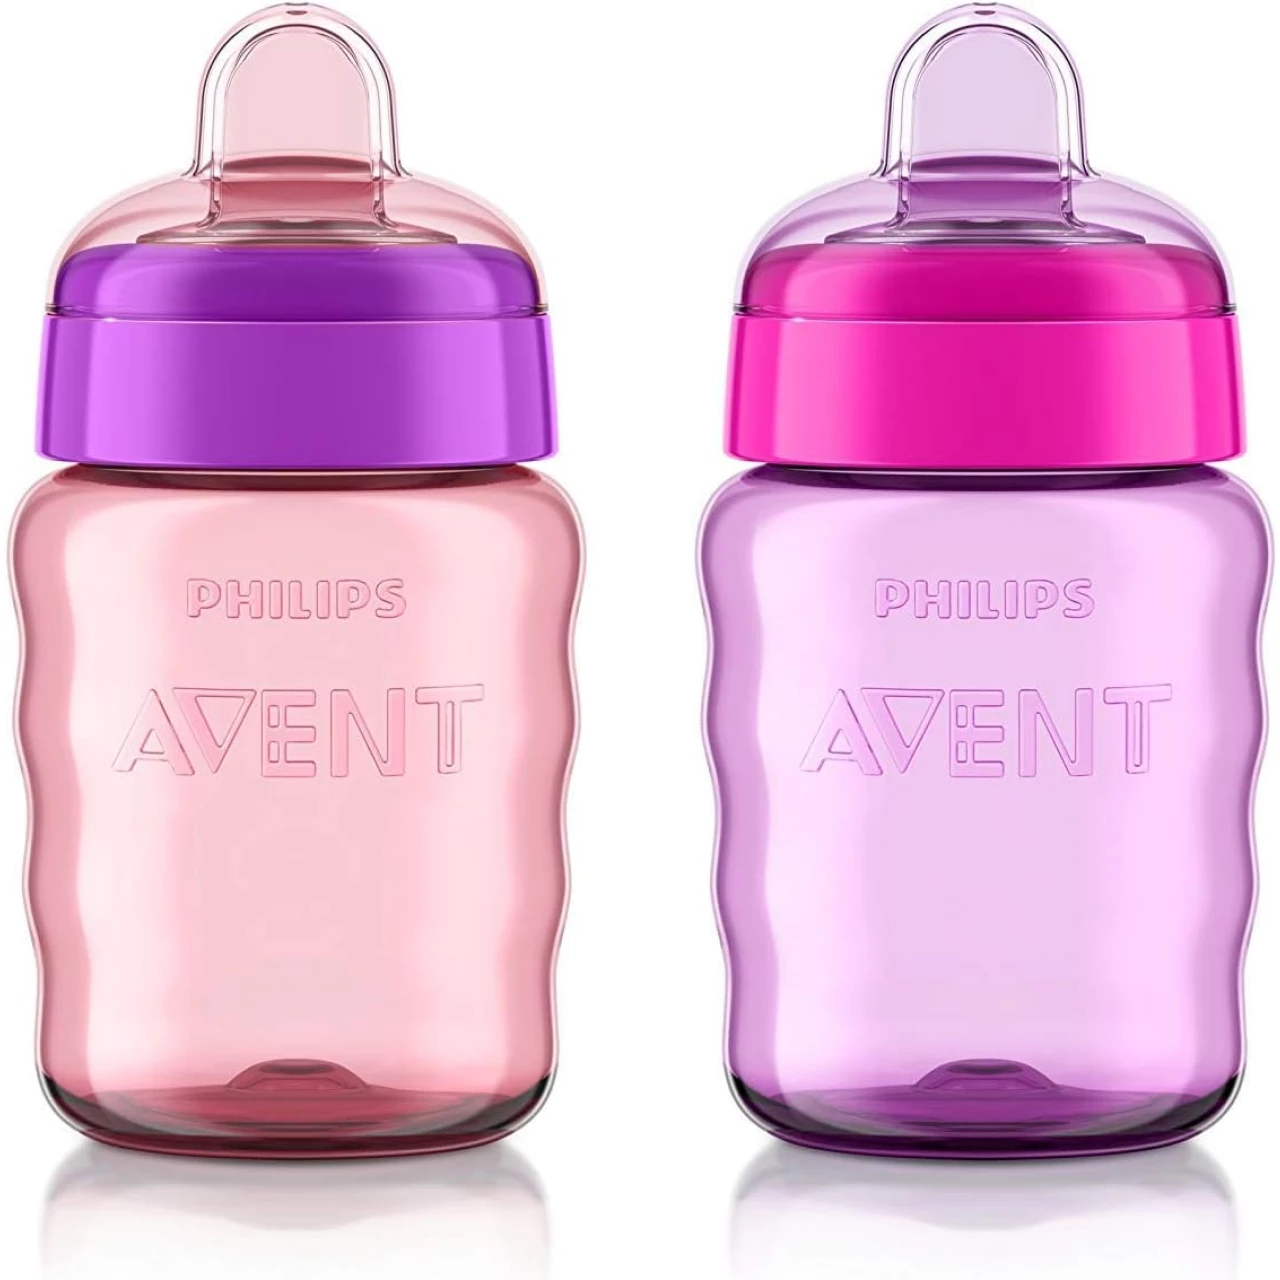 Philips AVENT My Easy Sippy Cup with Soft Spout and Spill-Proof Design